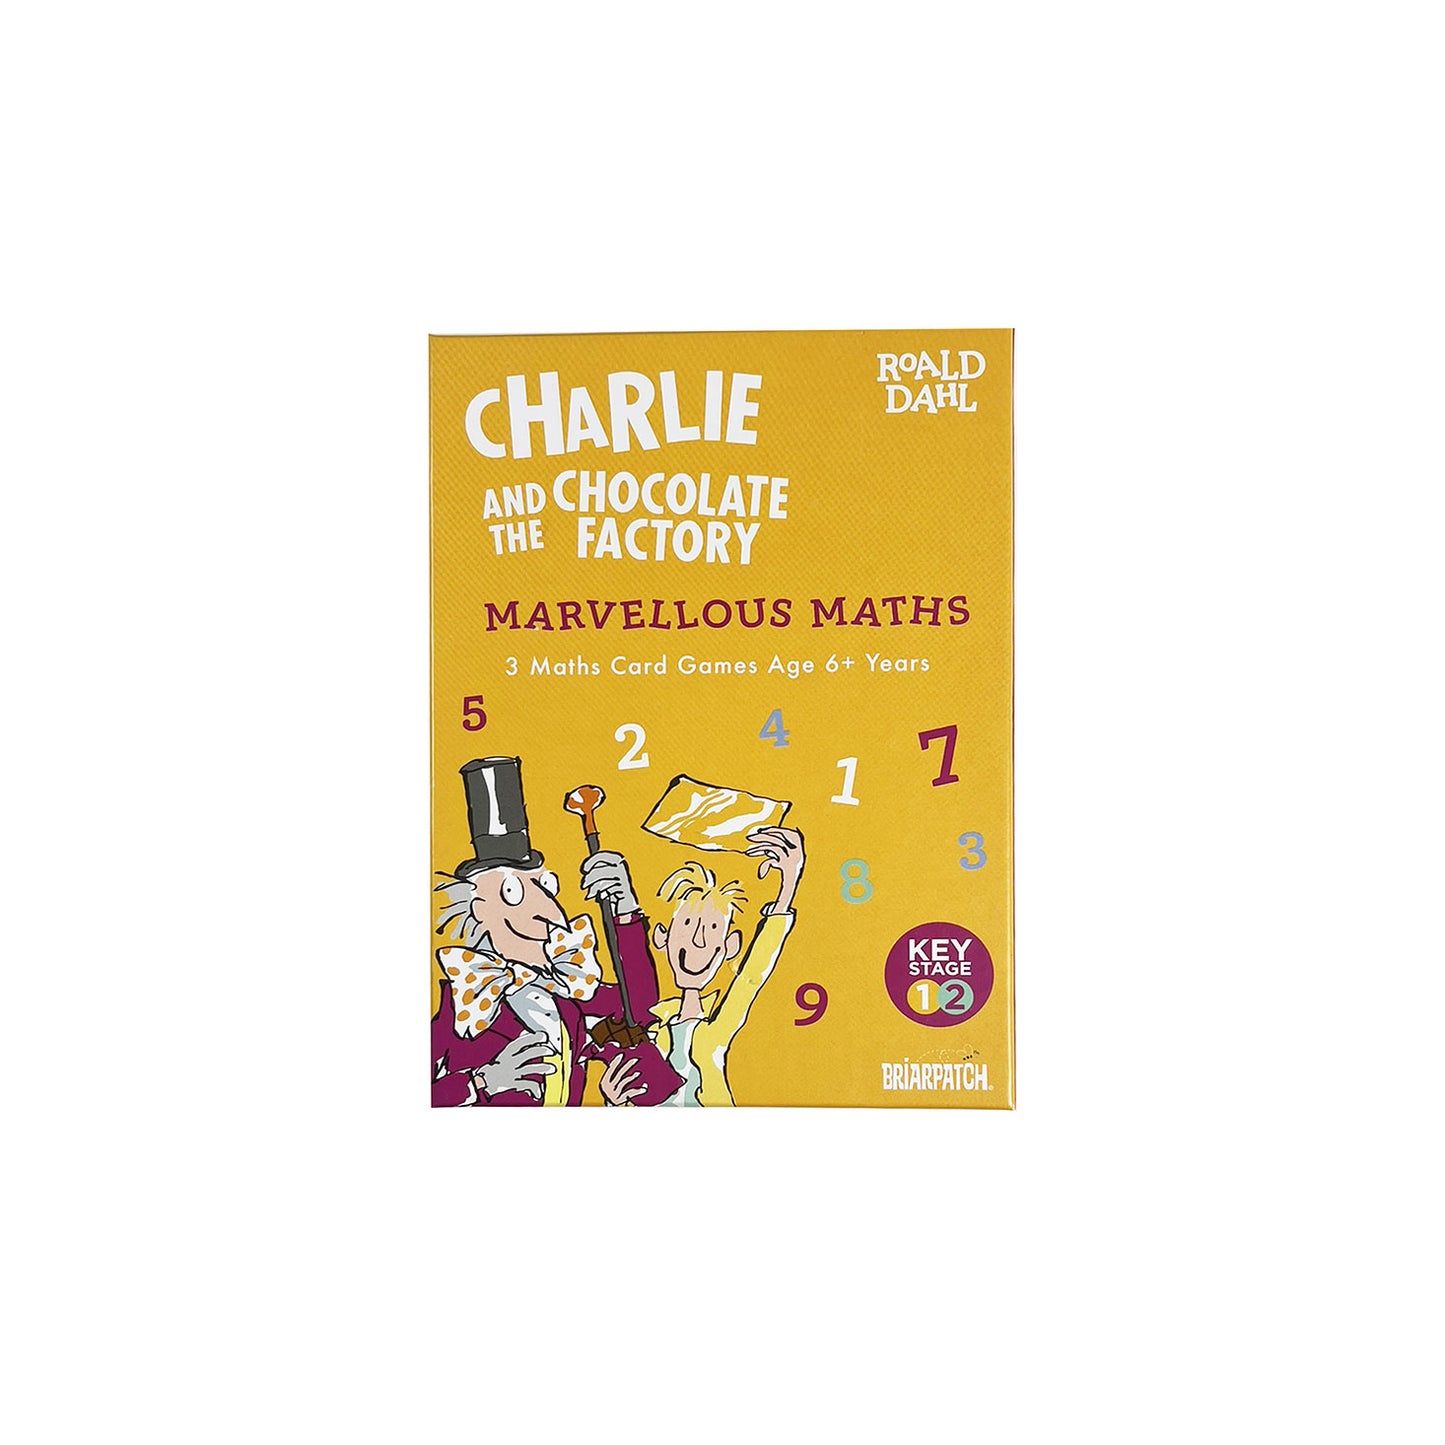 Charlie and the Chocolate Factory Marvellous Maths game, based on Roald Dahl's story and Quentin Blake illustrations